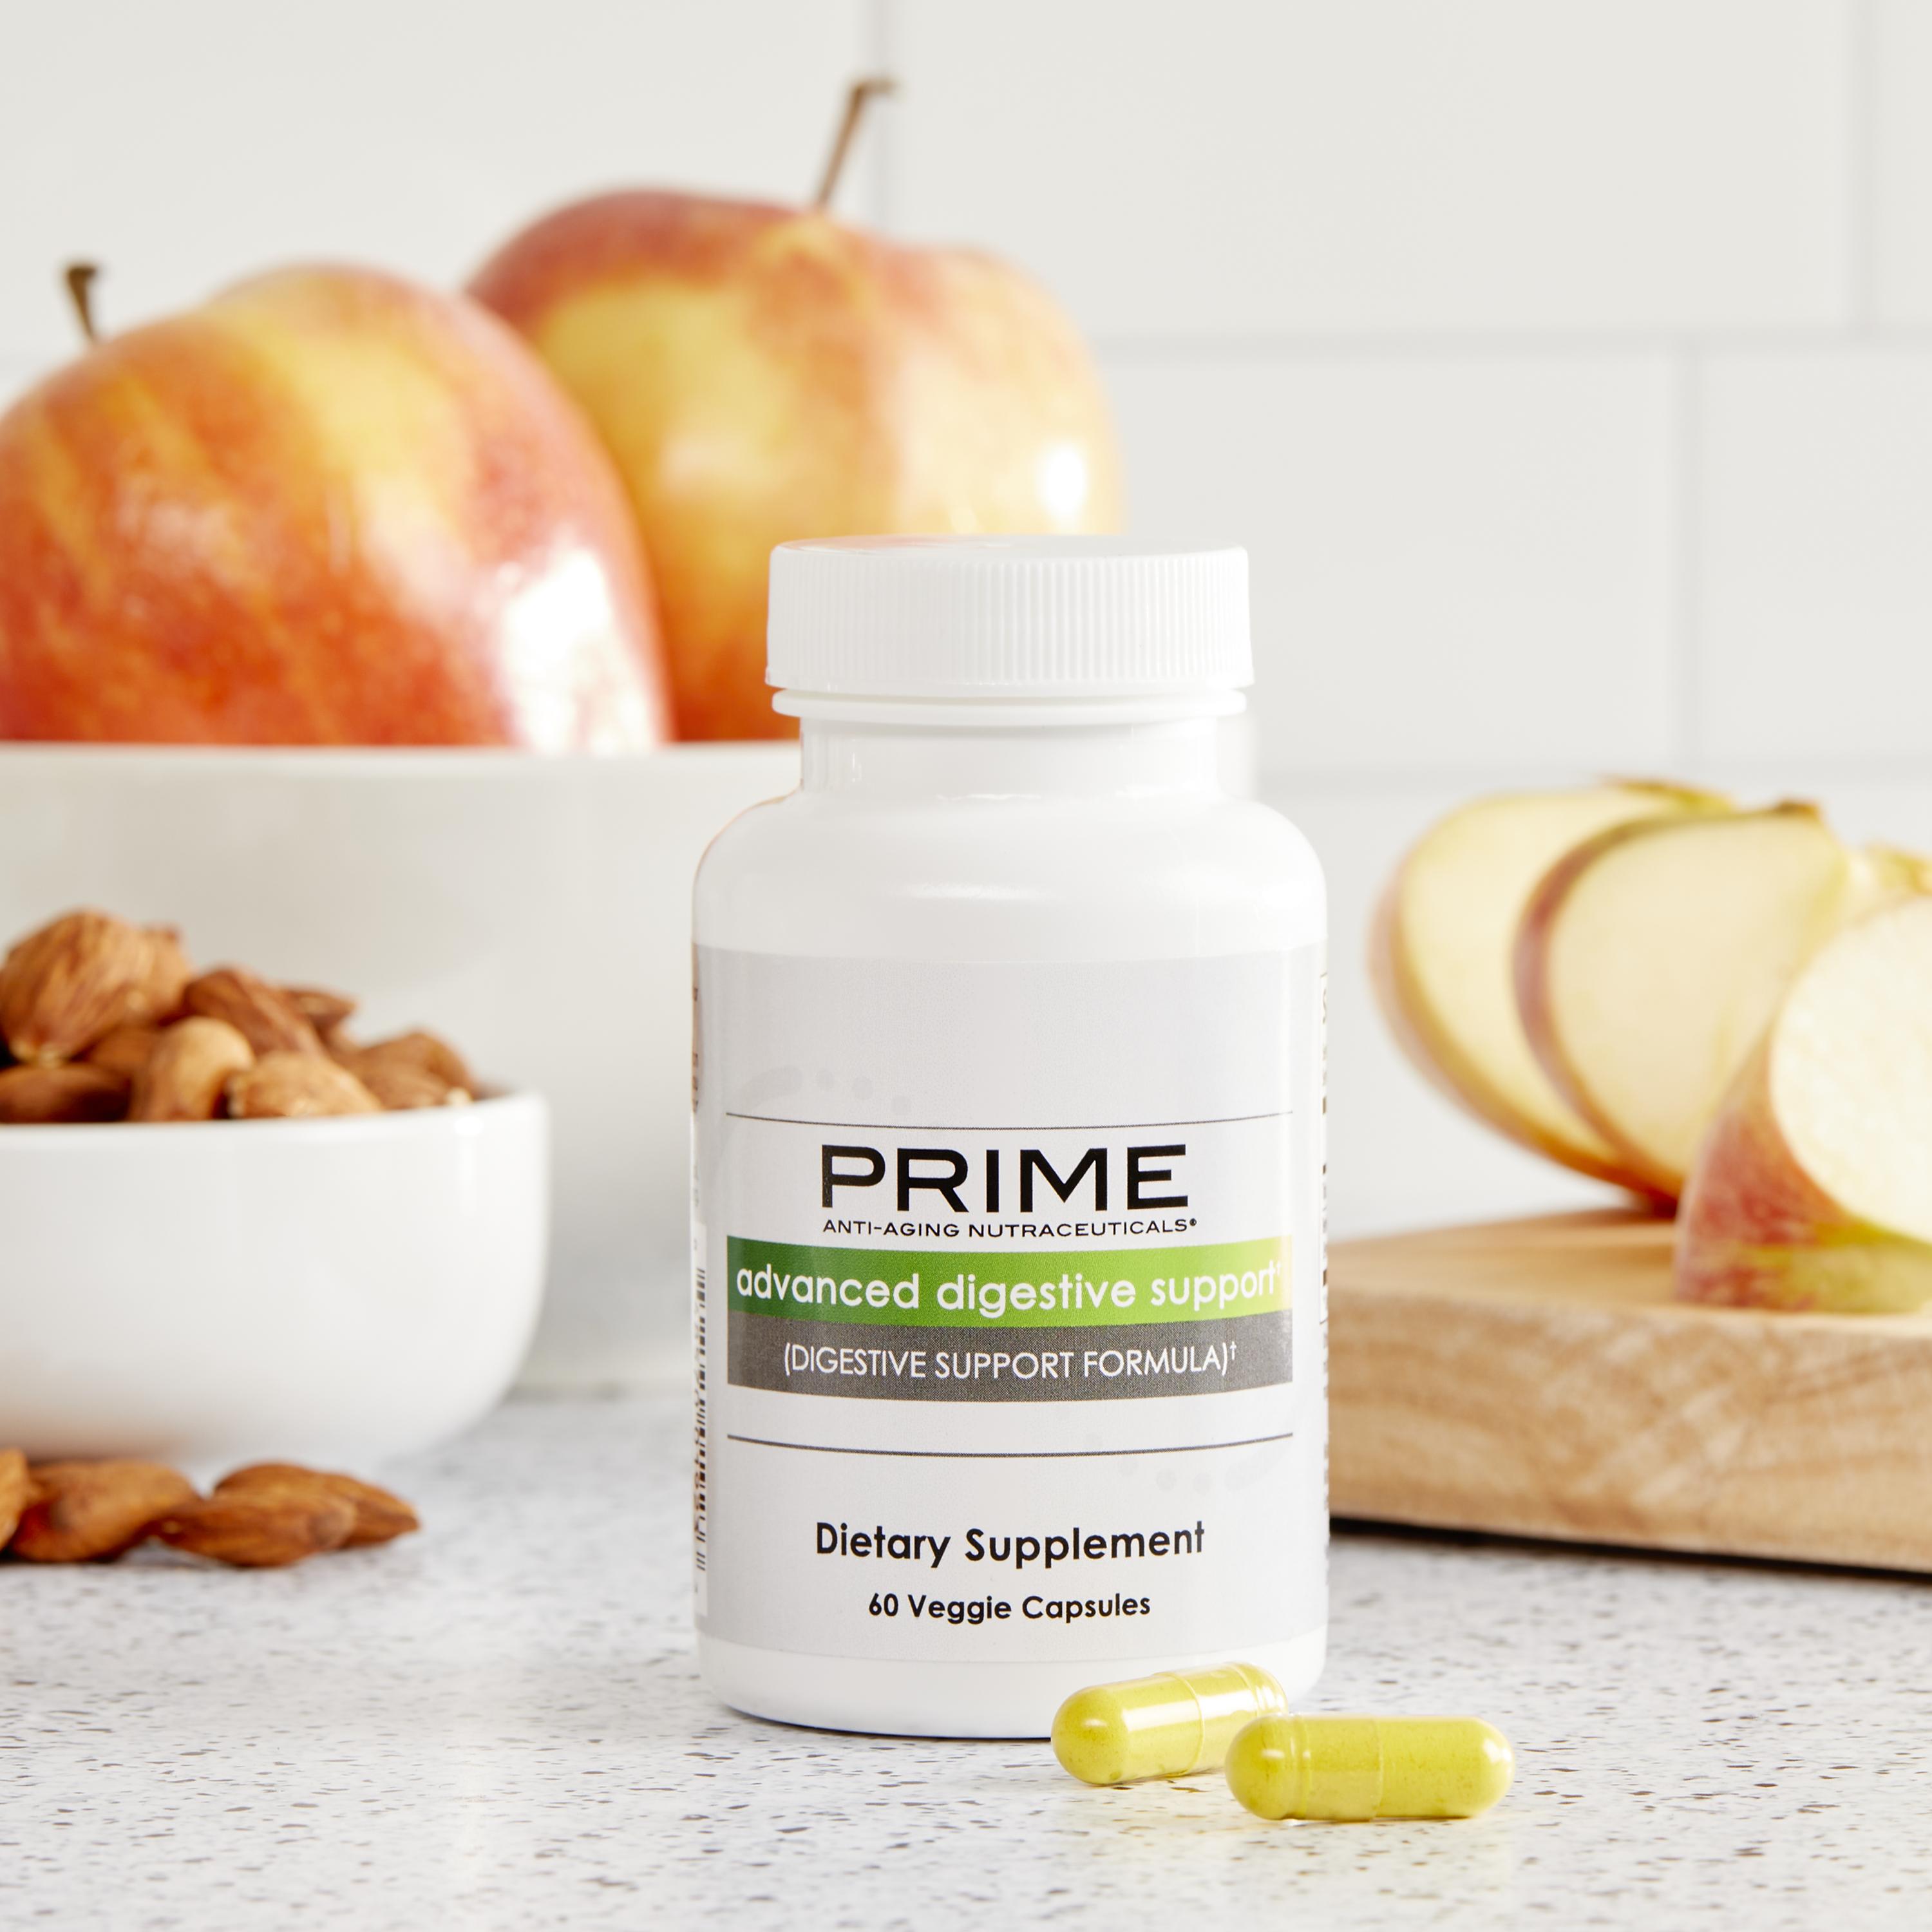 PRIME™ Advanced Digestive Support